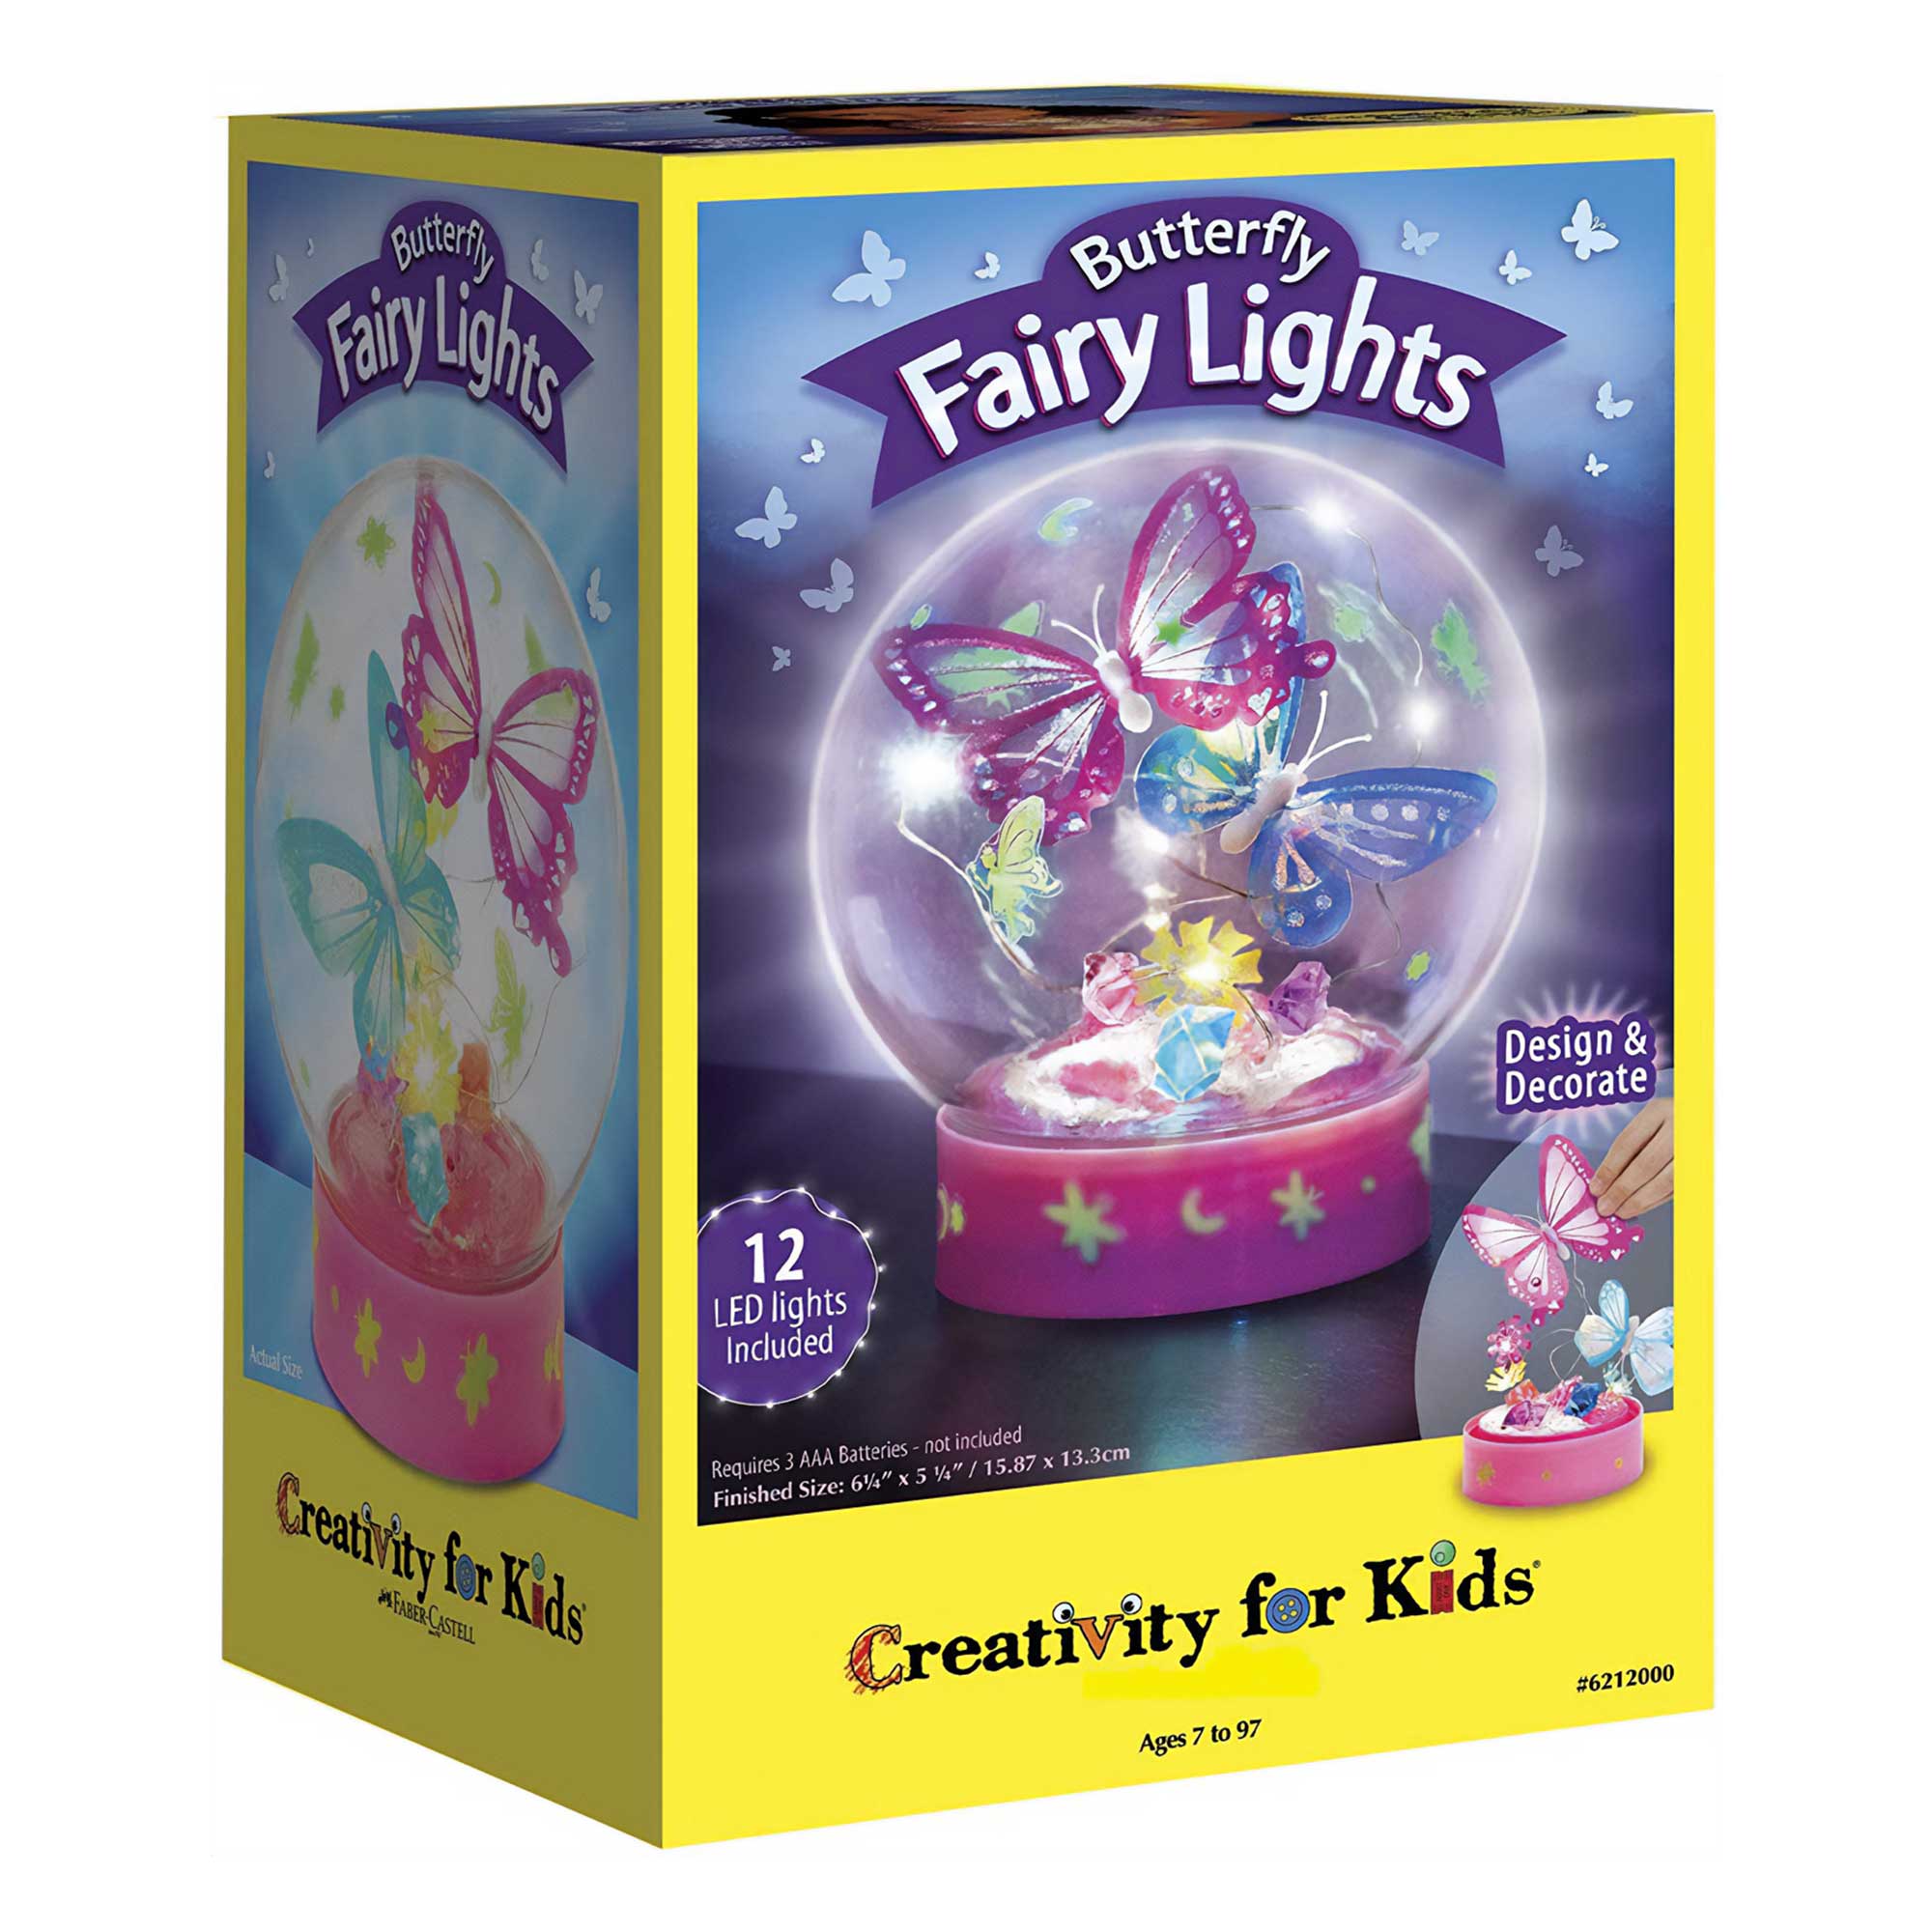 Creativity for Kids - Butterfly Fairy Lights